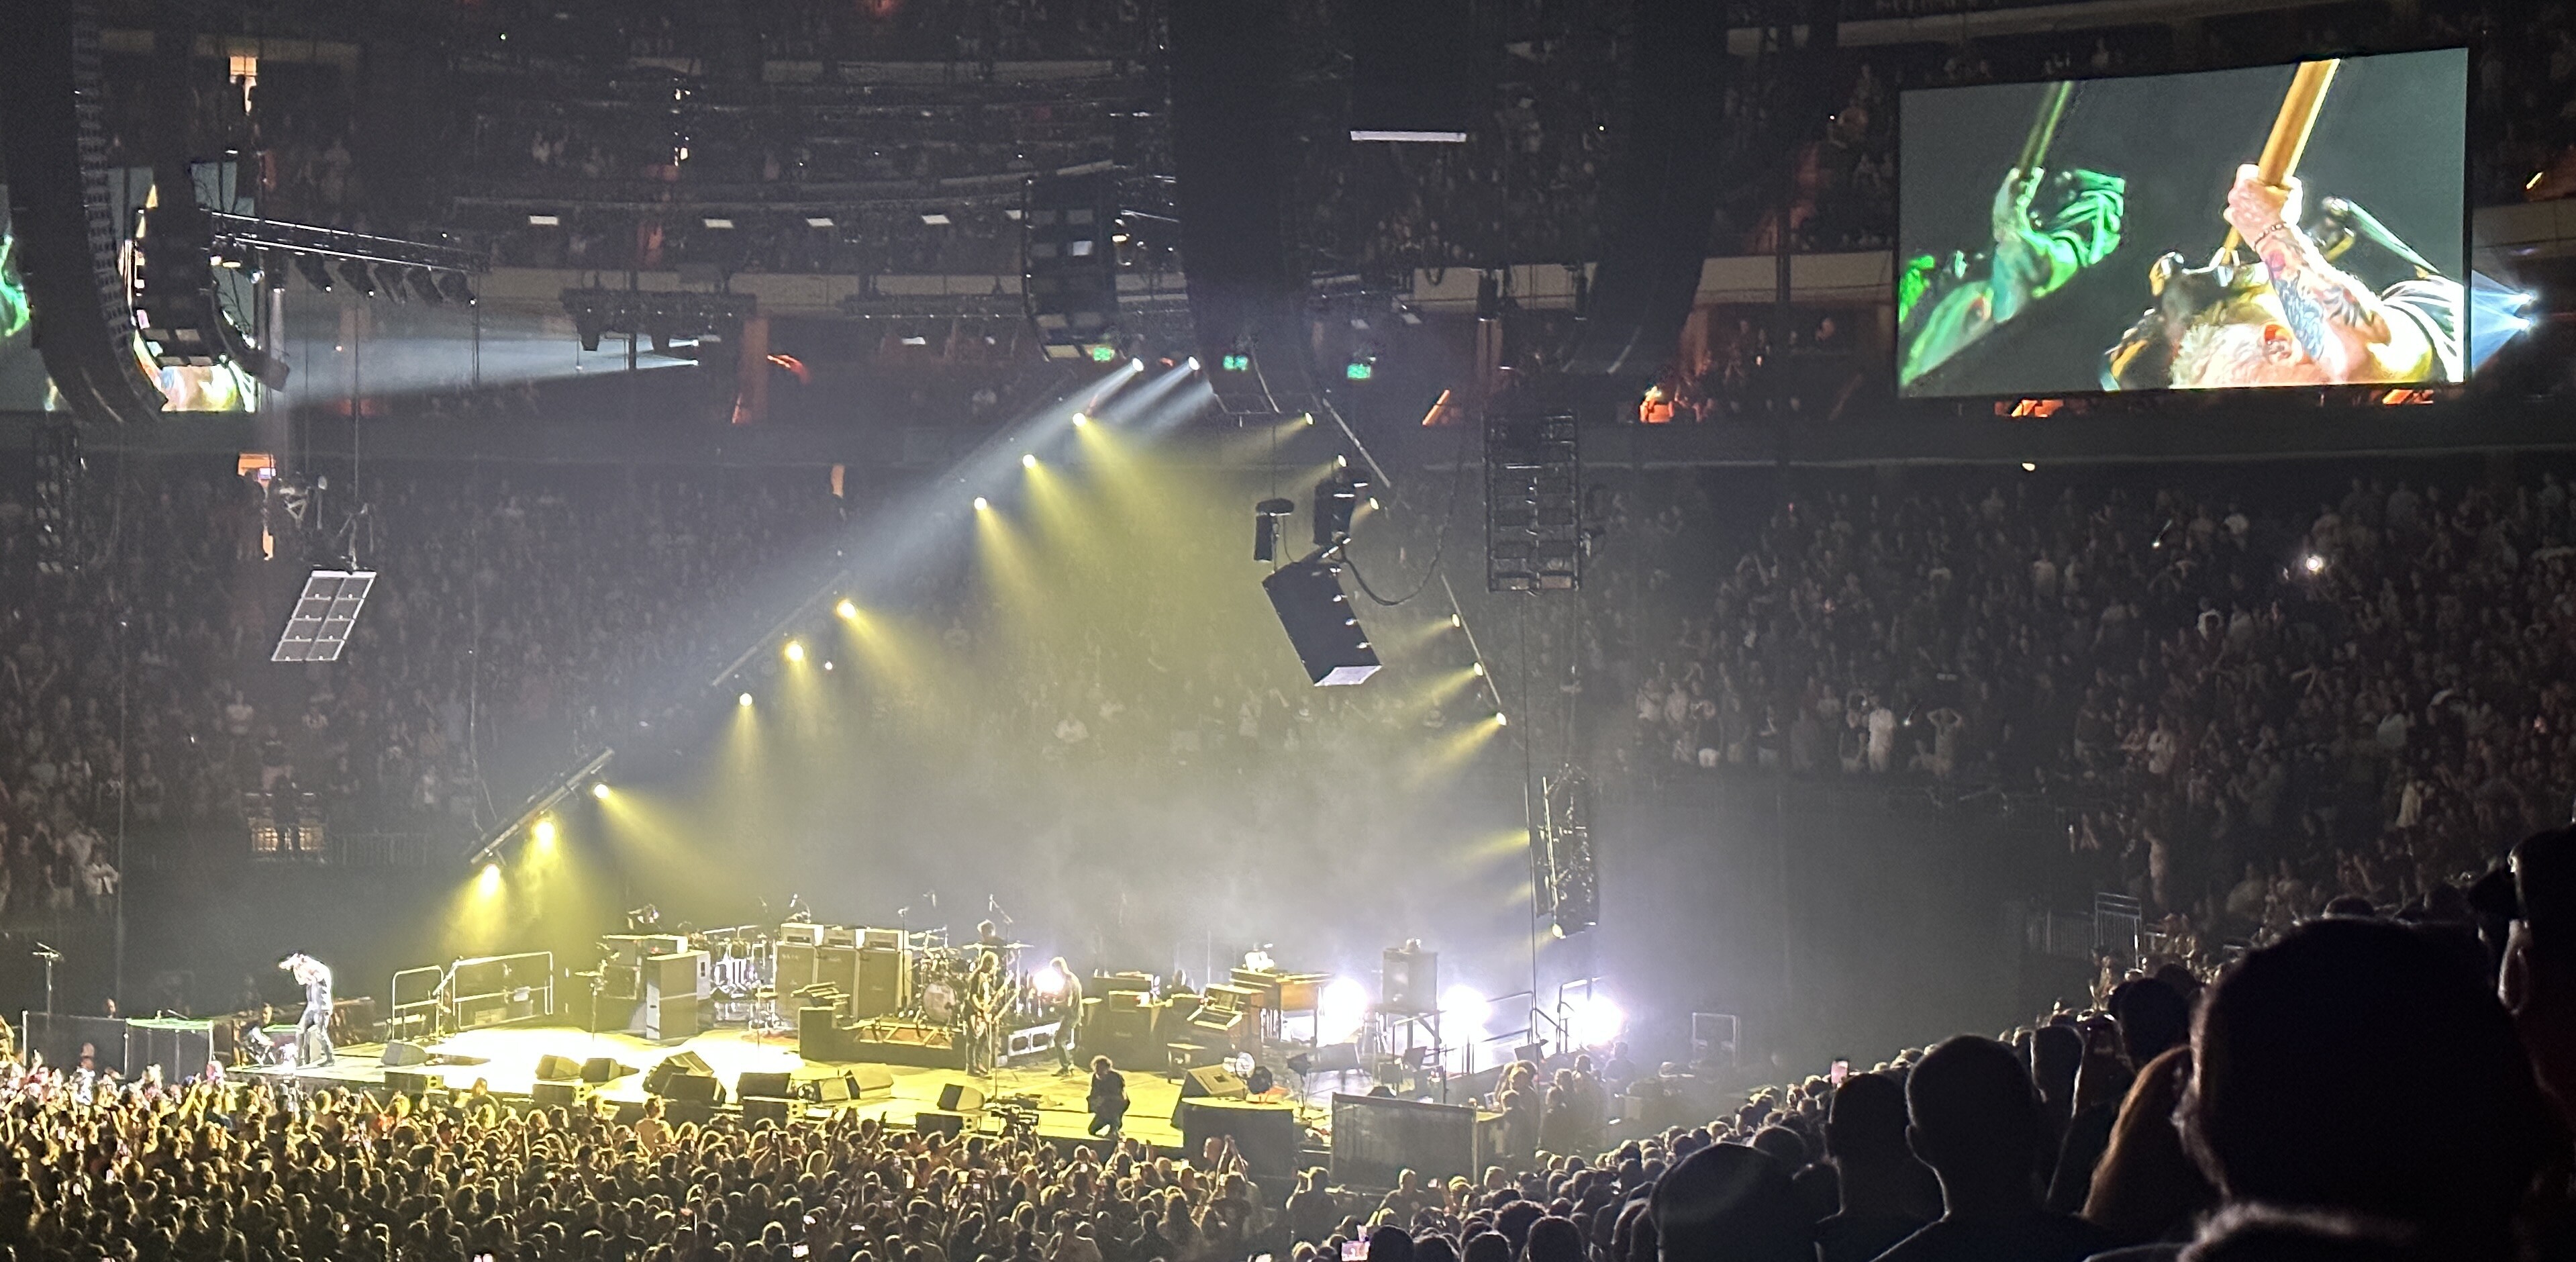 Very far away photo of the Pearl Jam concert at Xcel Energy Center in Saint Paul with the stage bathed in yellow spotlights with McCready far stage right and a video board hanging high stage left with a close-up of him holding his guitar behind his head